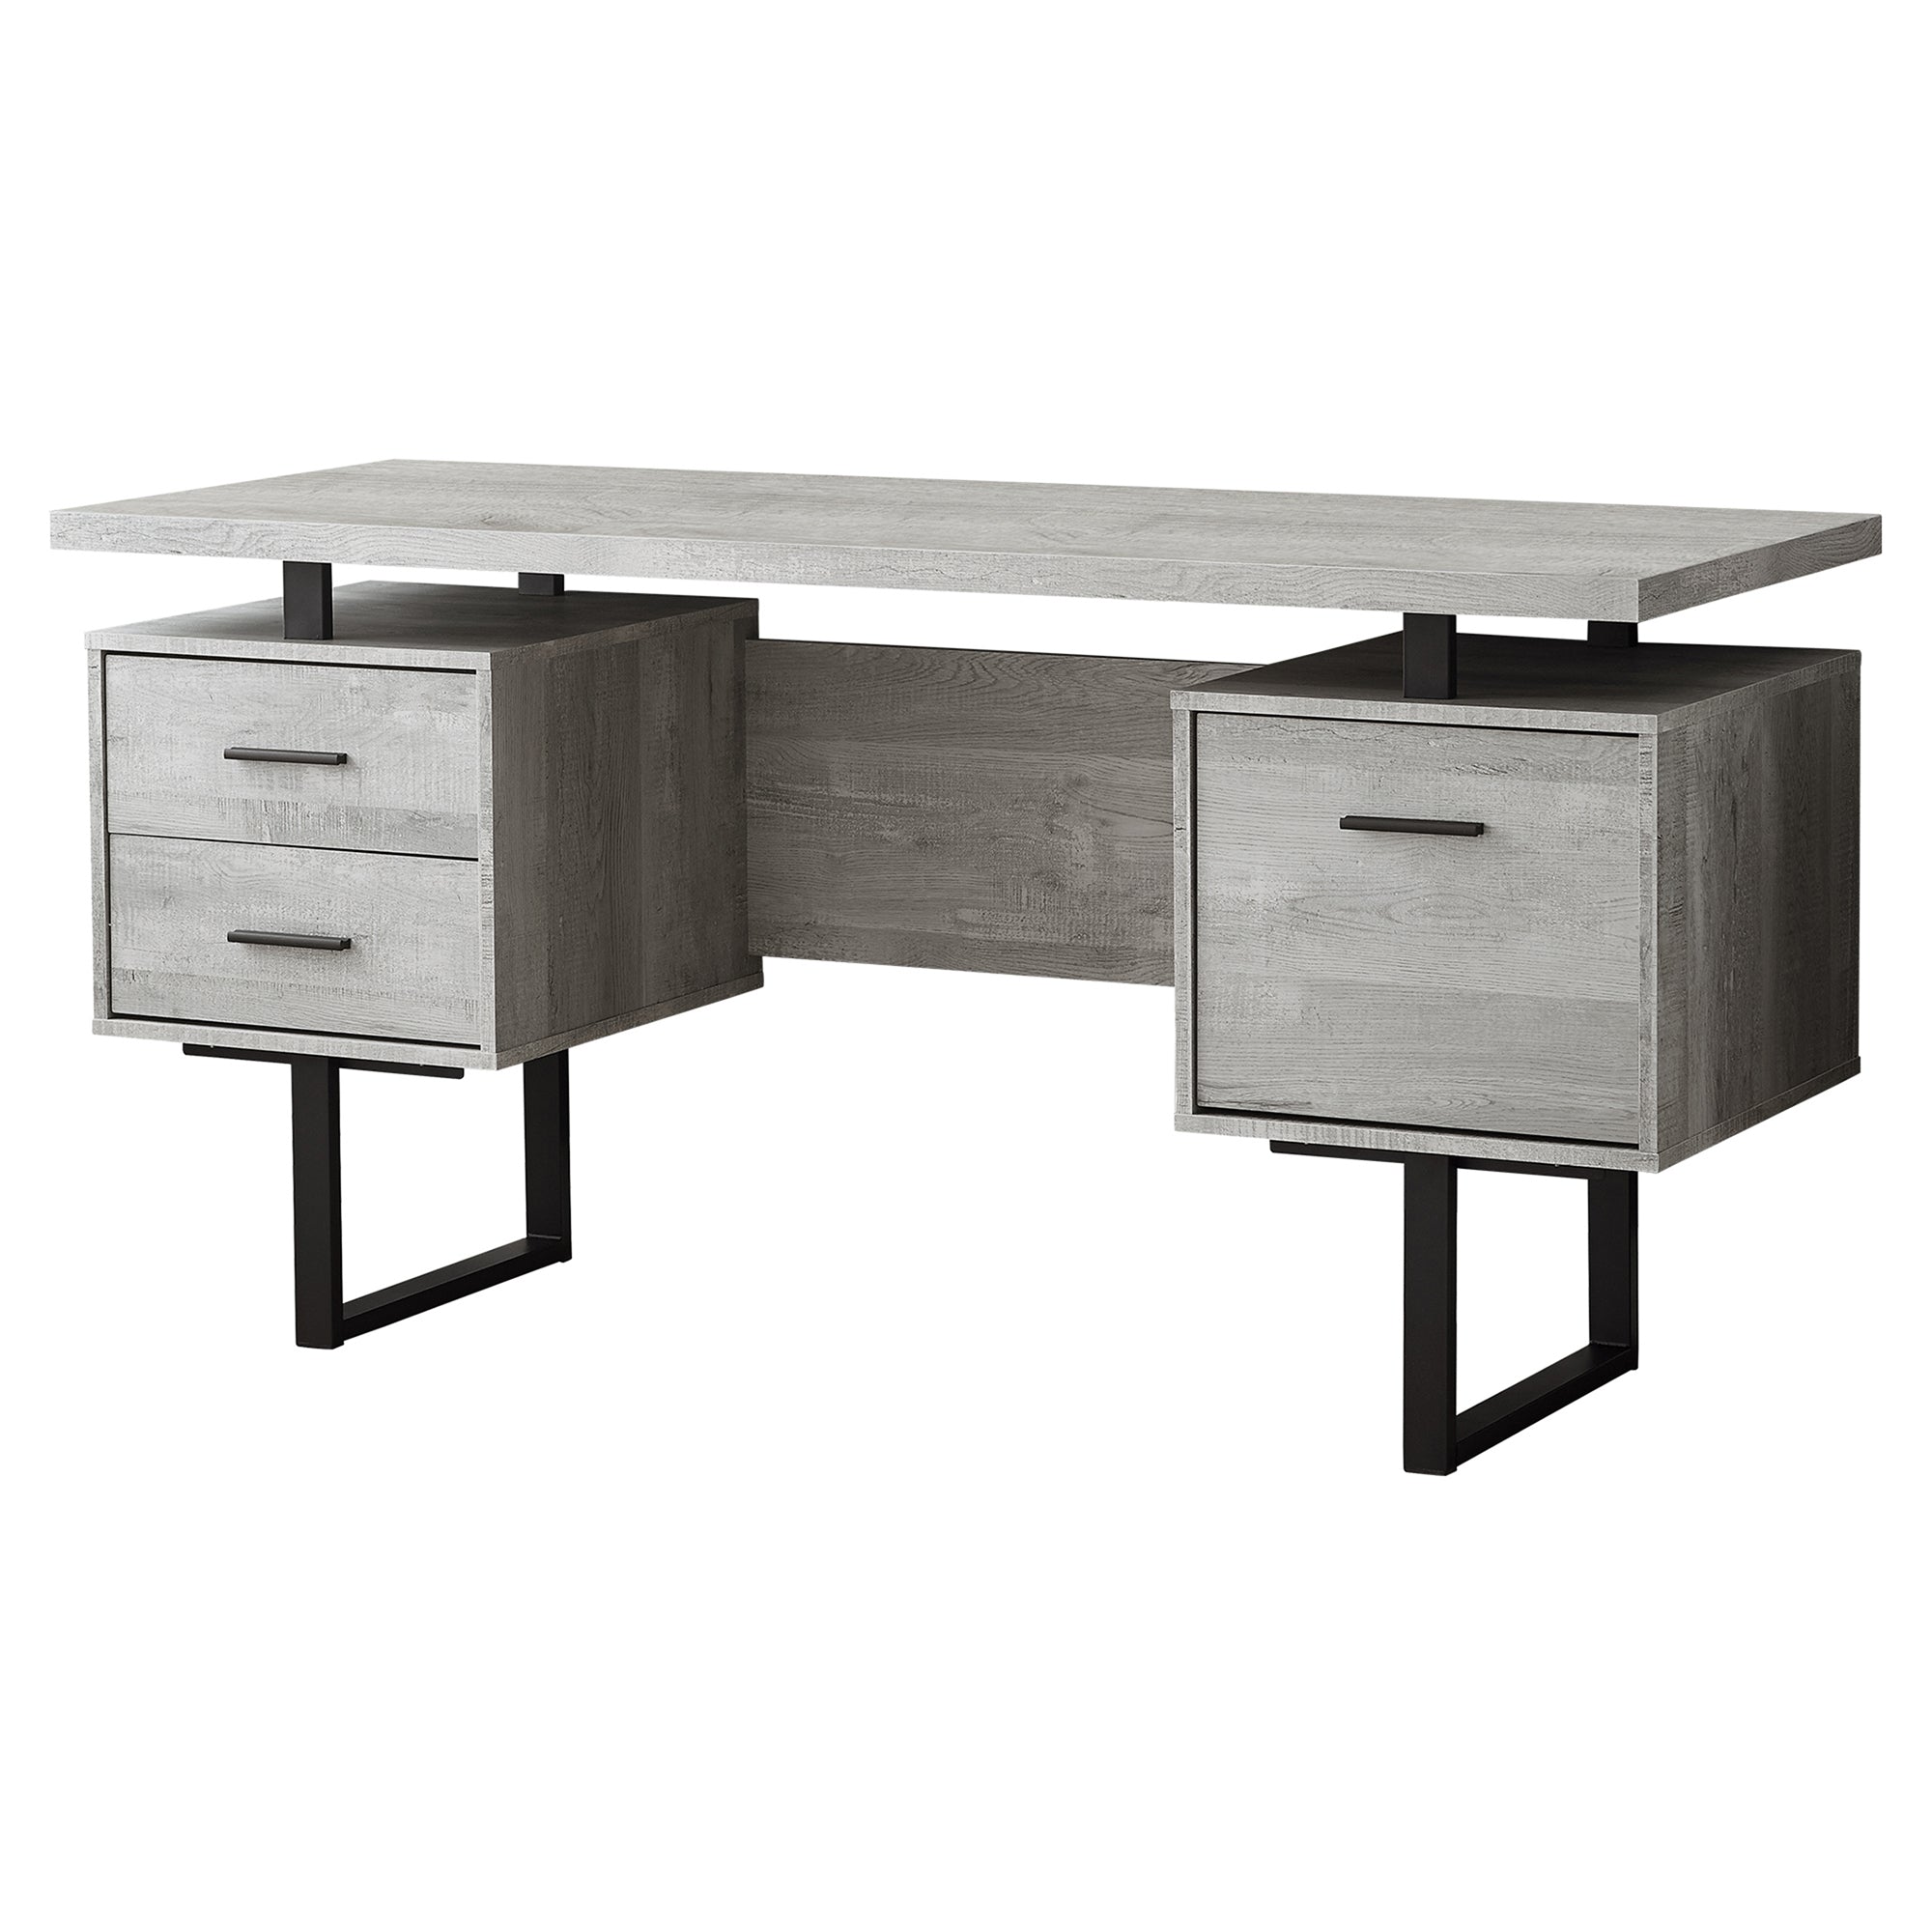 MN-837417    Computer Desk, Home Office, Laptop, Left, Right Set-Up, Storage Drawers, 60"L, Metal, Laminate, Grey Reclaimed Wood Look, Black, Contemporary, Modern